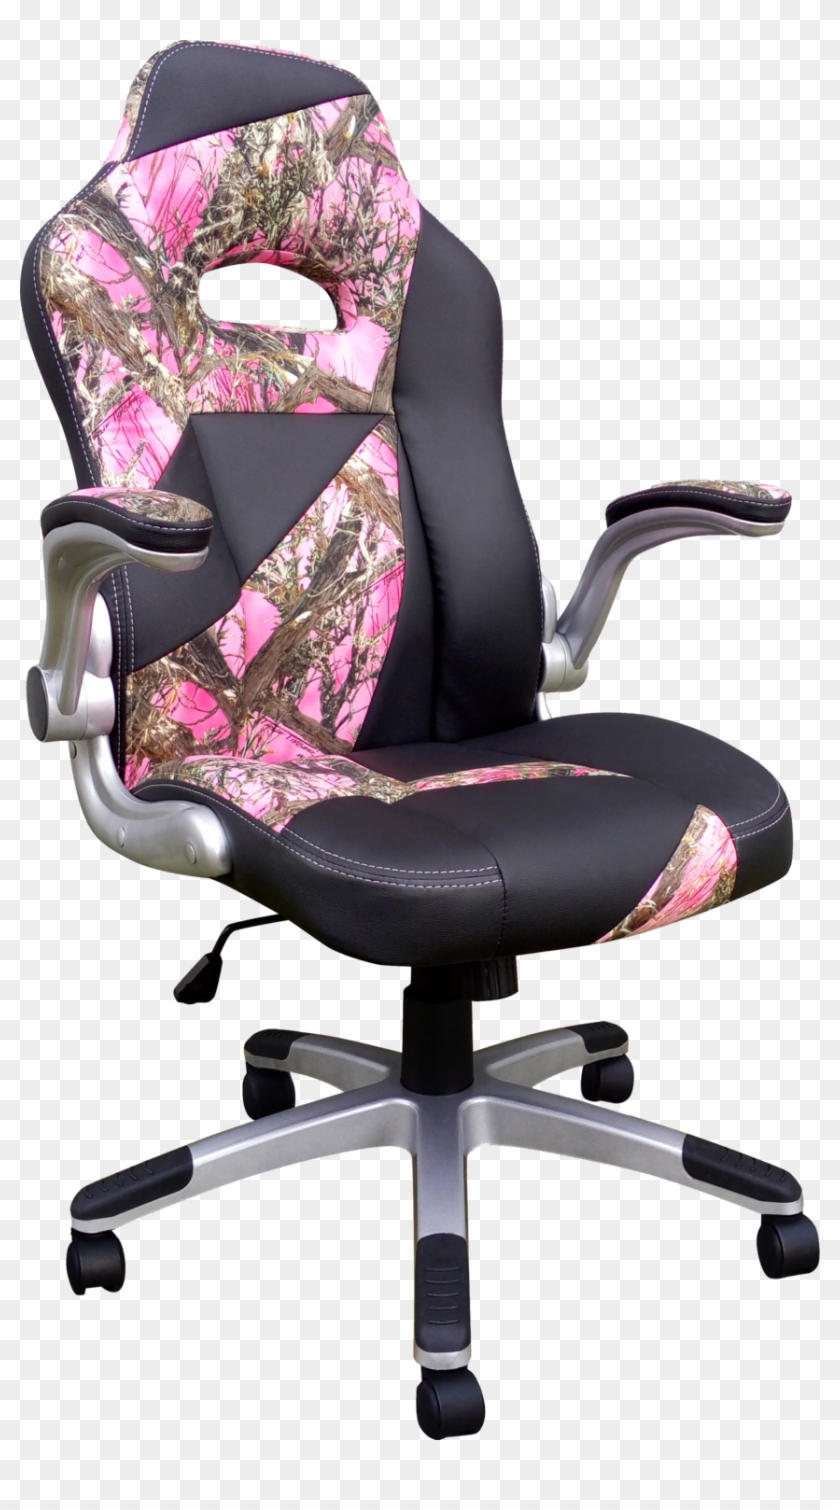 Discover Home Produc Cameron Army Camouflage Desk Chair - Pink Camo Office Chair Clipart #3993726